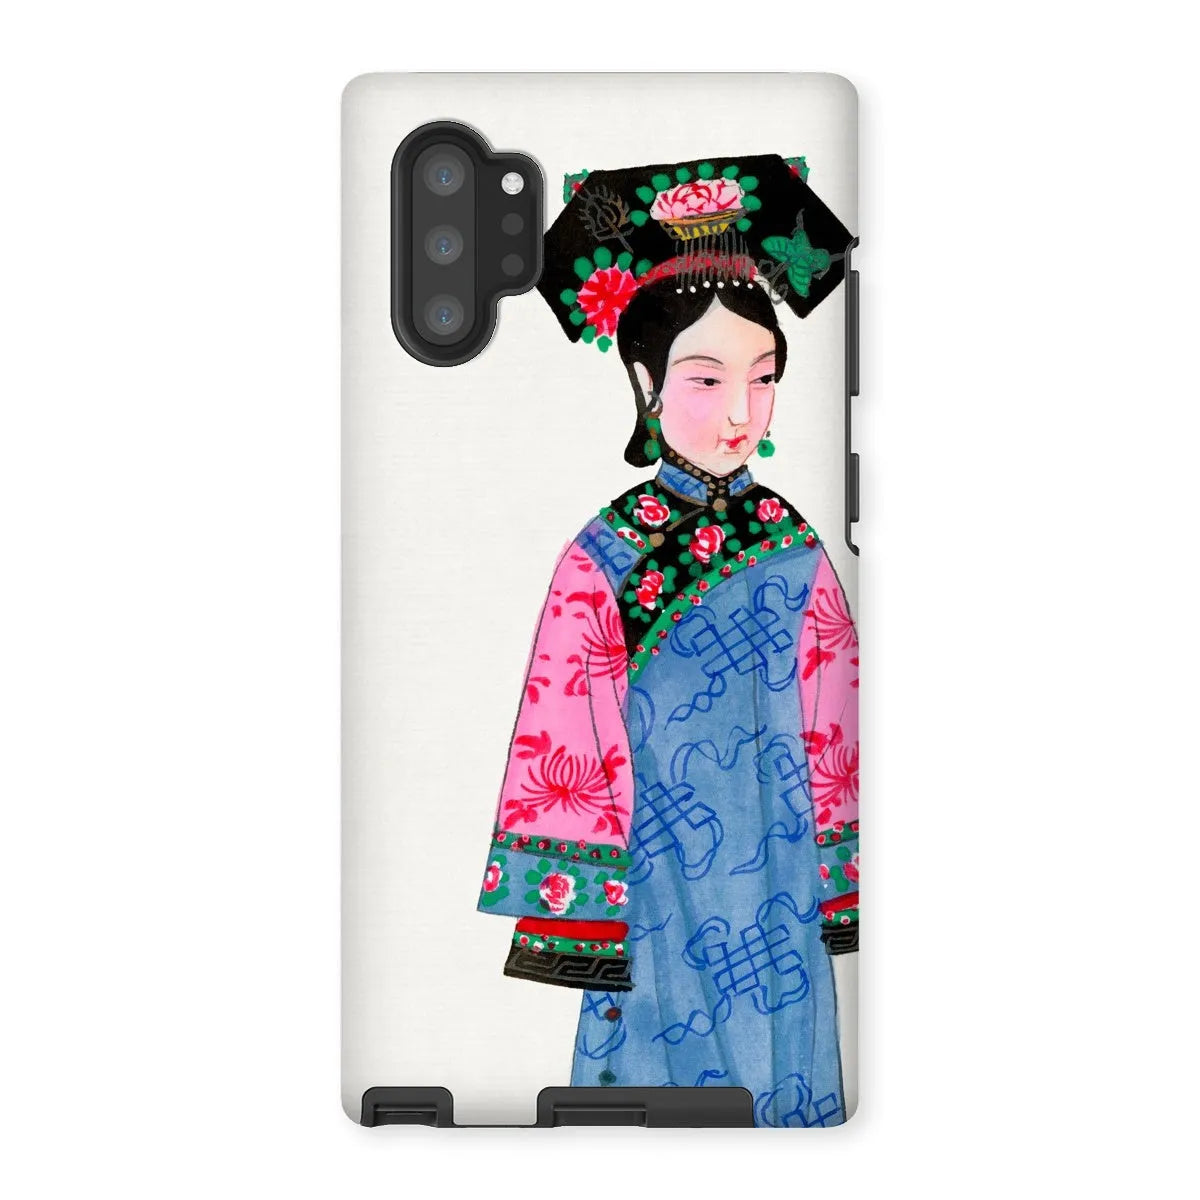 Noblewoman Too - Manchu Aesthetic Art Phone Case - Samsung Galaxy Note 10p / Matte - Mobile Phone Cases - Aesthetic Art